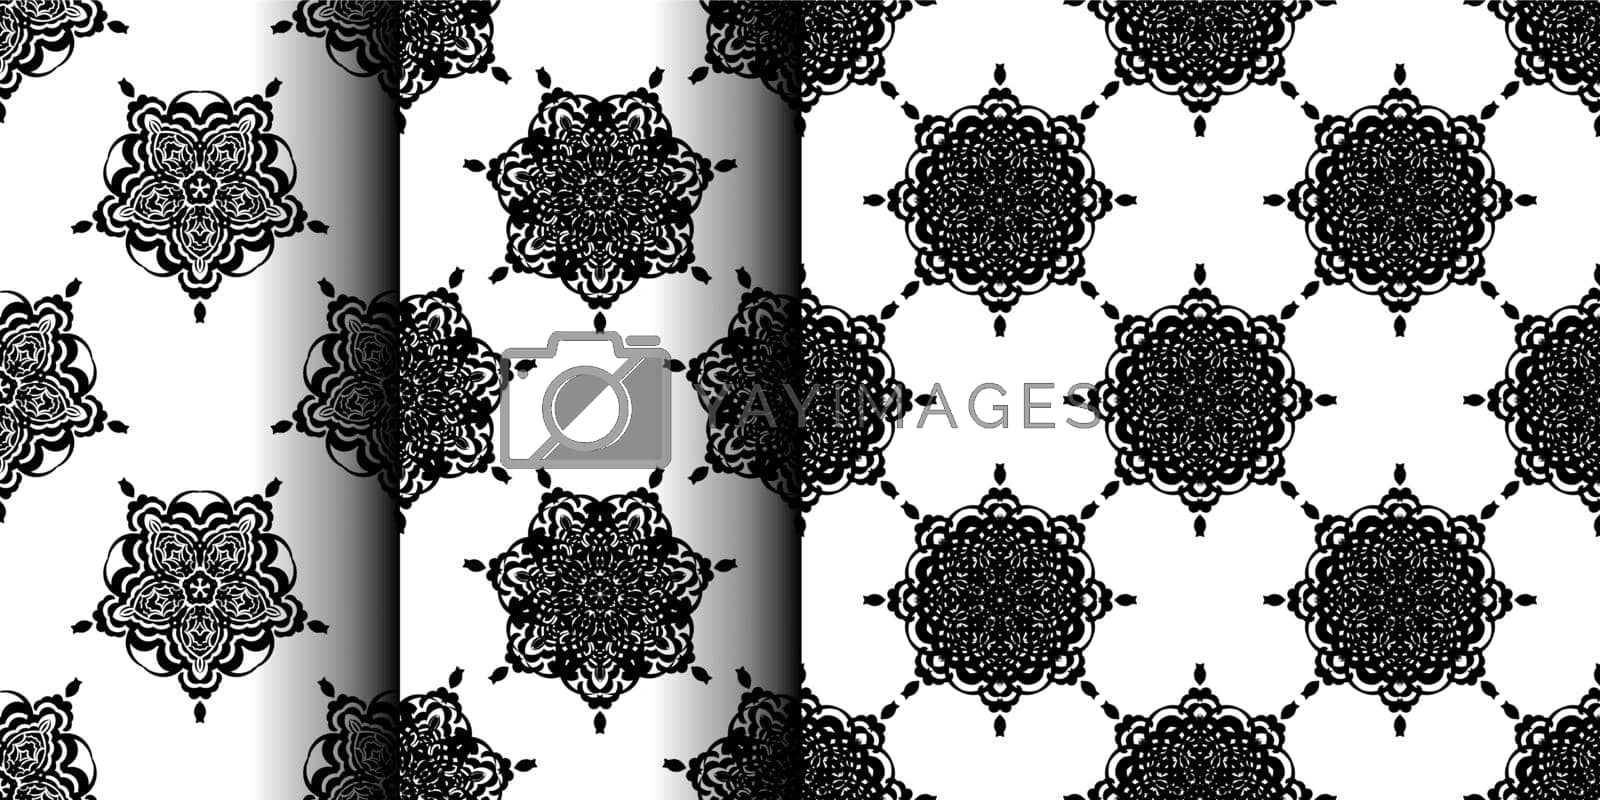 Seamless geometric line pattern set in eastern or arabic style. Black and white background. Good for backgrounds and prints. Vector illustration.